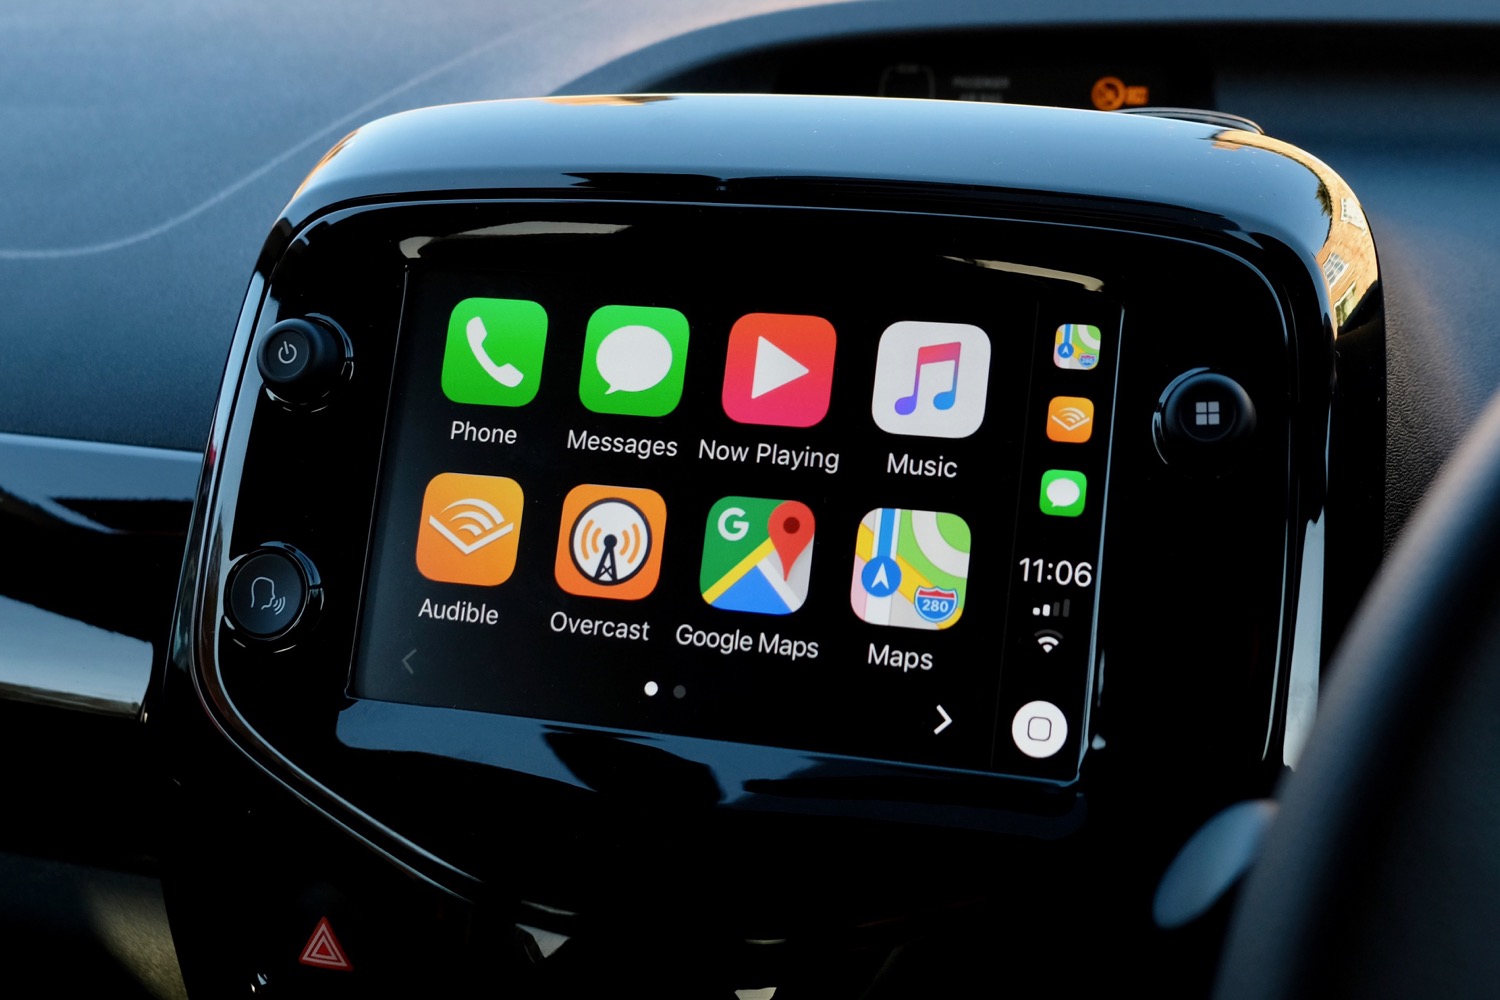 Here's how to get Apple CarPlay for your old car